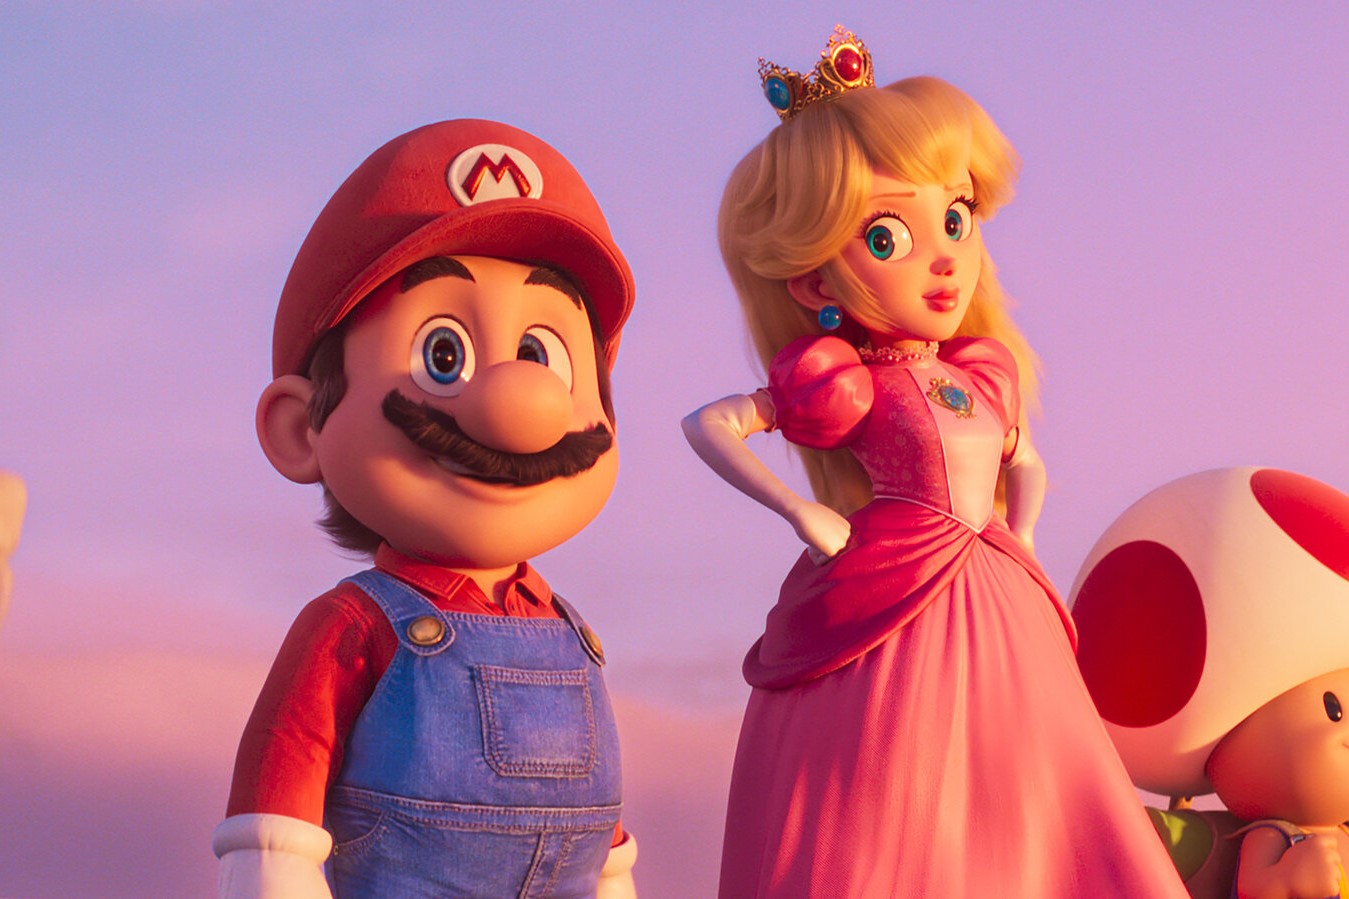 Princess Daisy's Age In The Mario Universe Revealed!